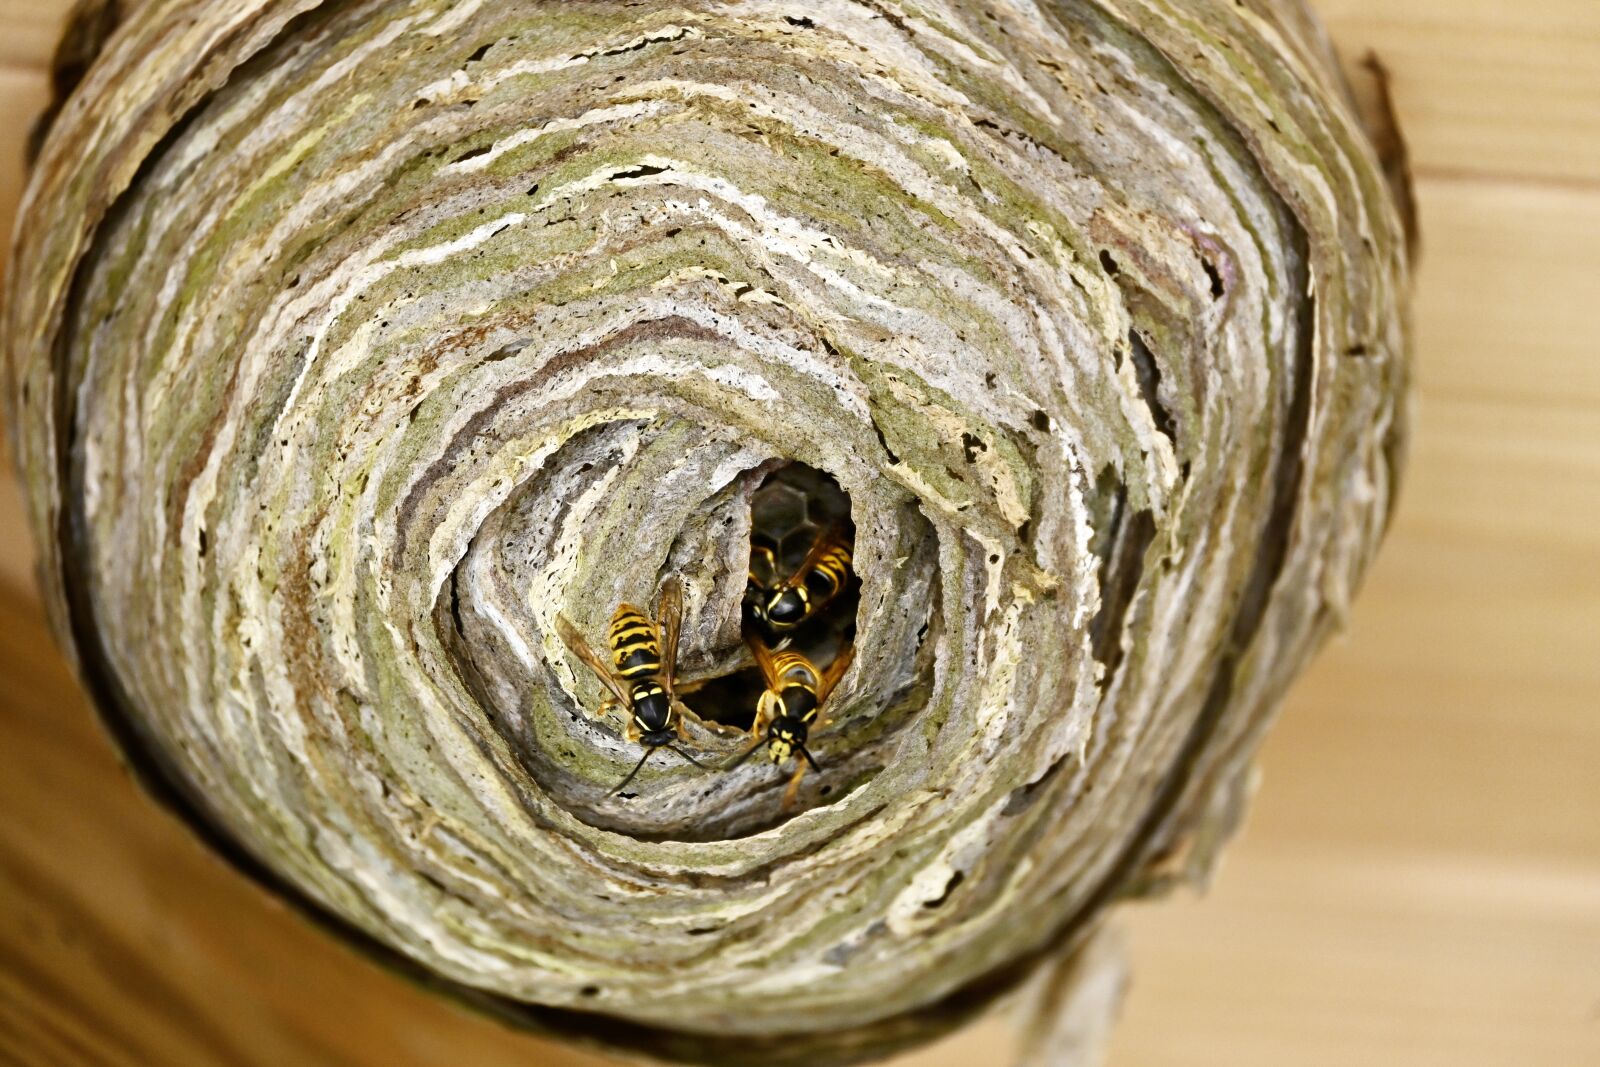 Nikon Z 50 sample photo. The hive, wasp, insect photography